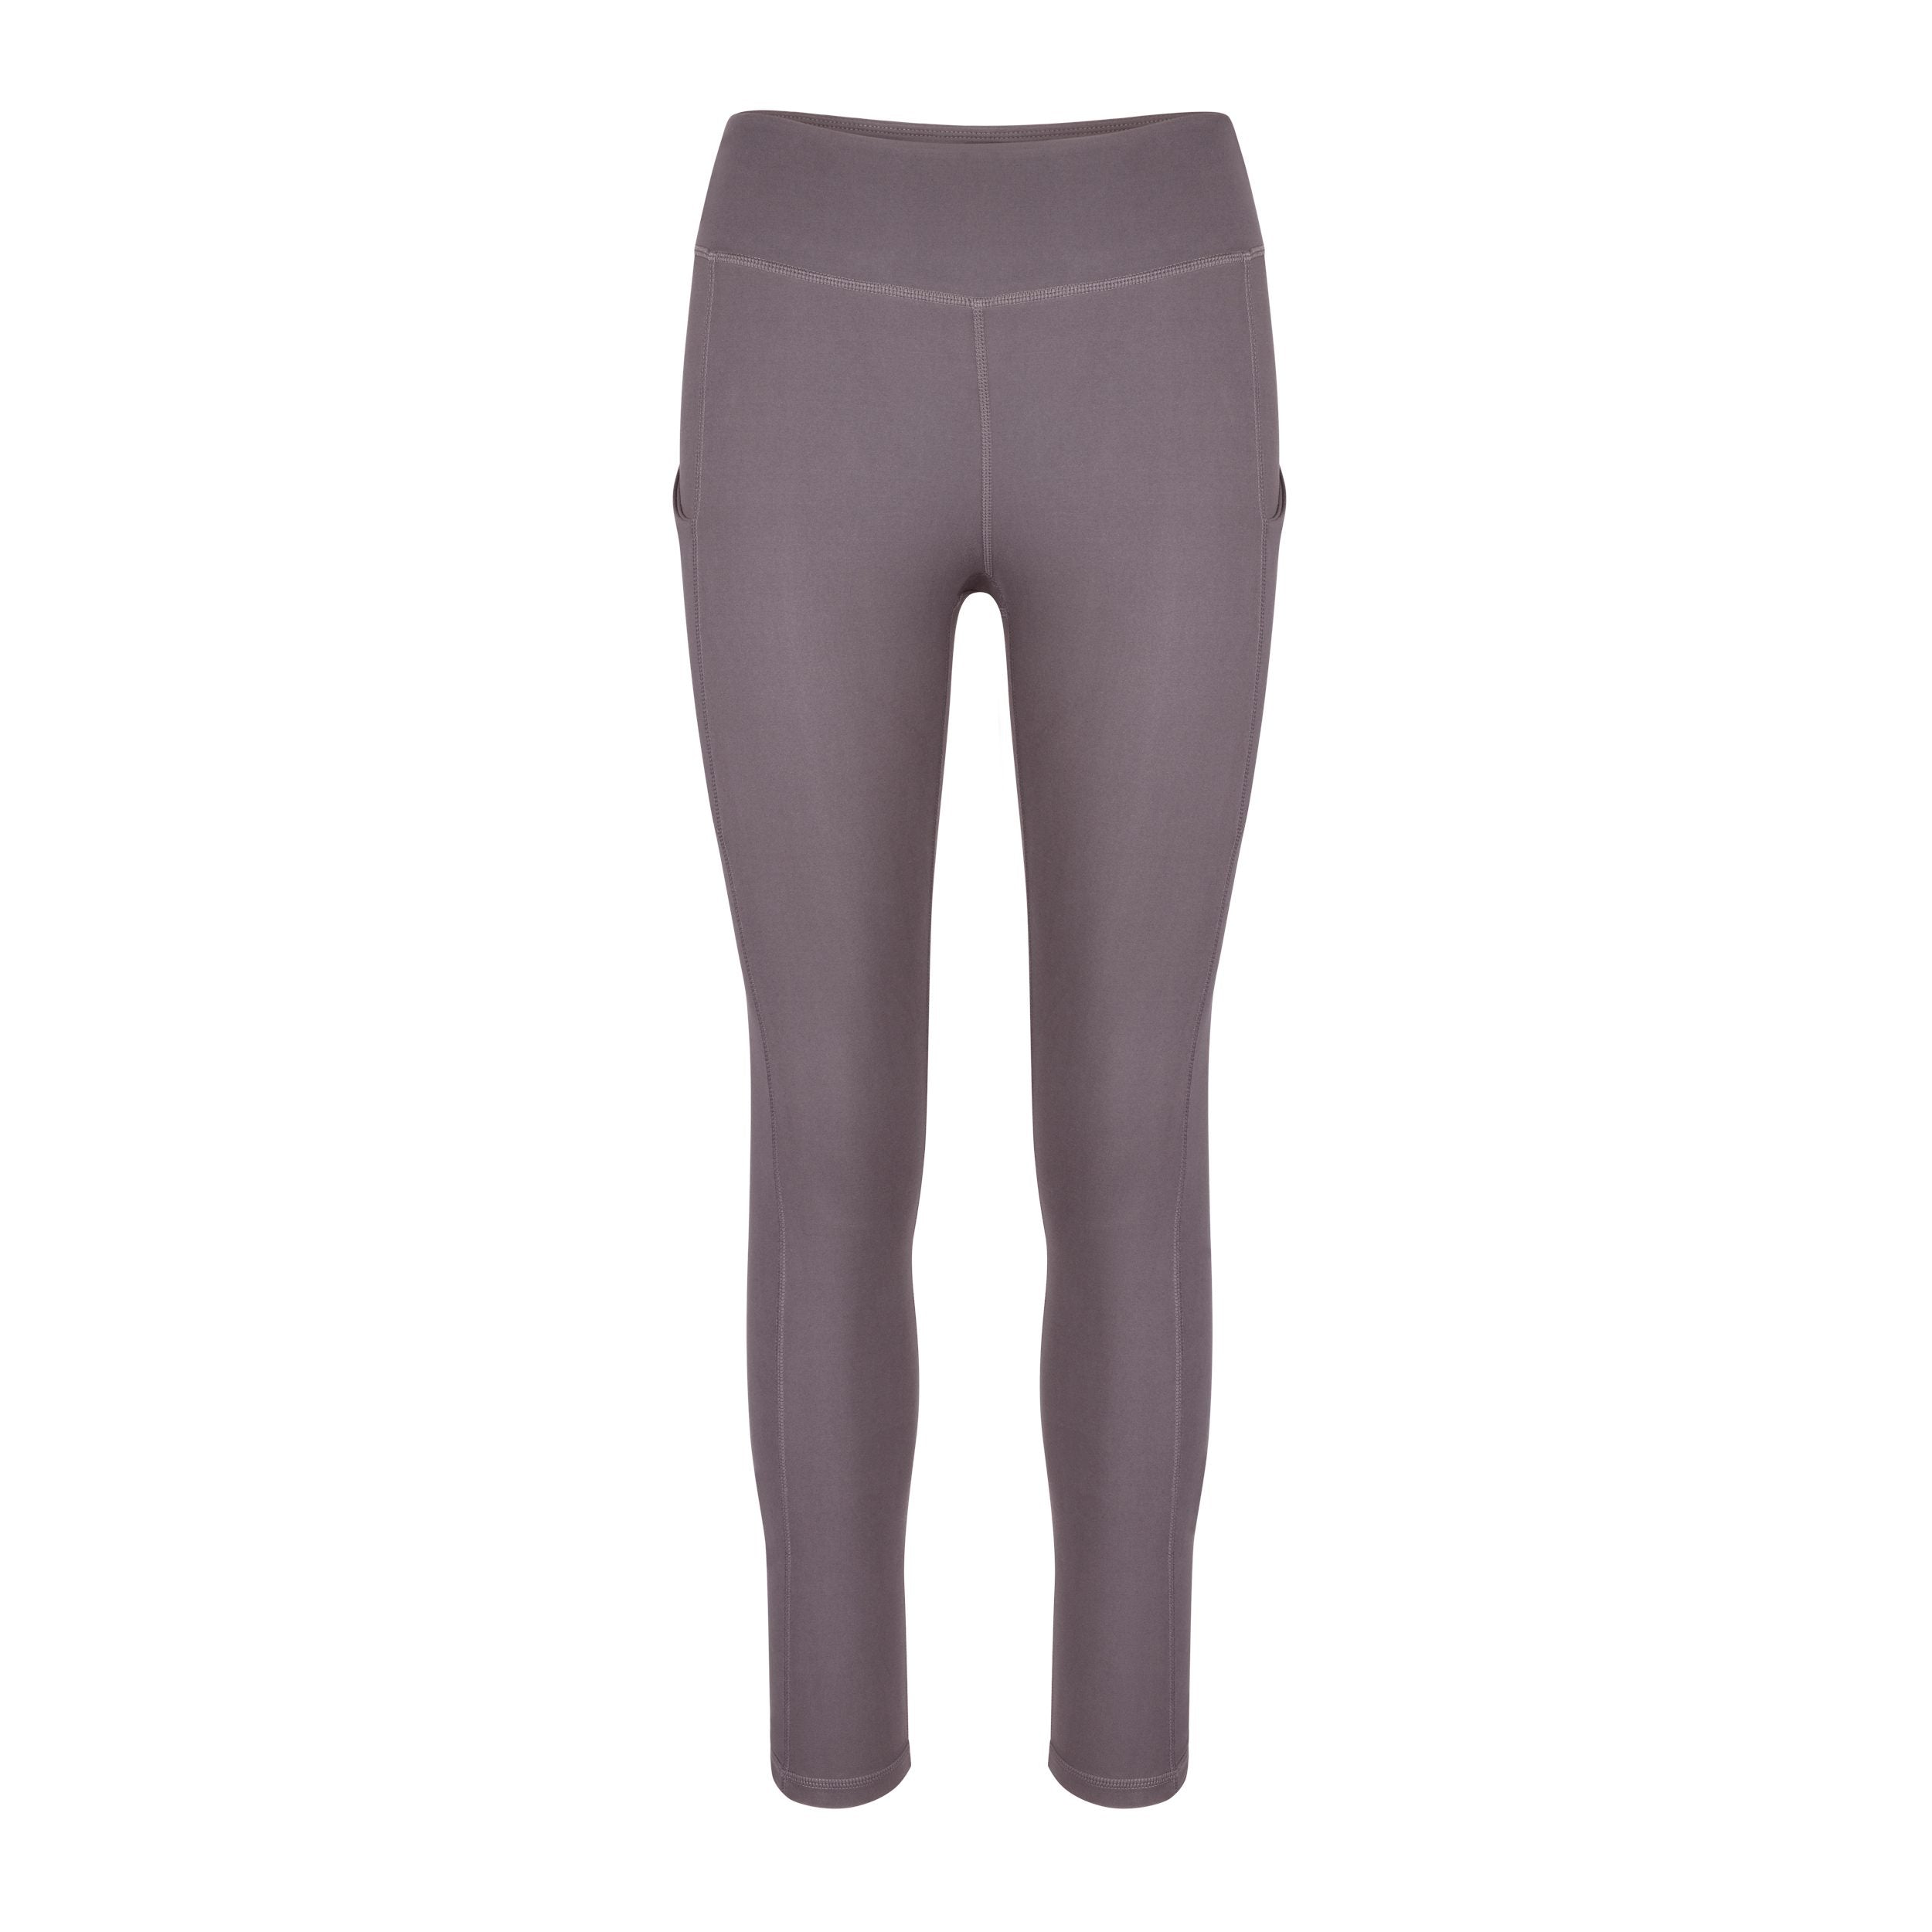 Women's Buttery Soft Activewear Leggings with Pockets - Smoky Mauve, L 